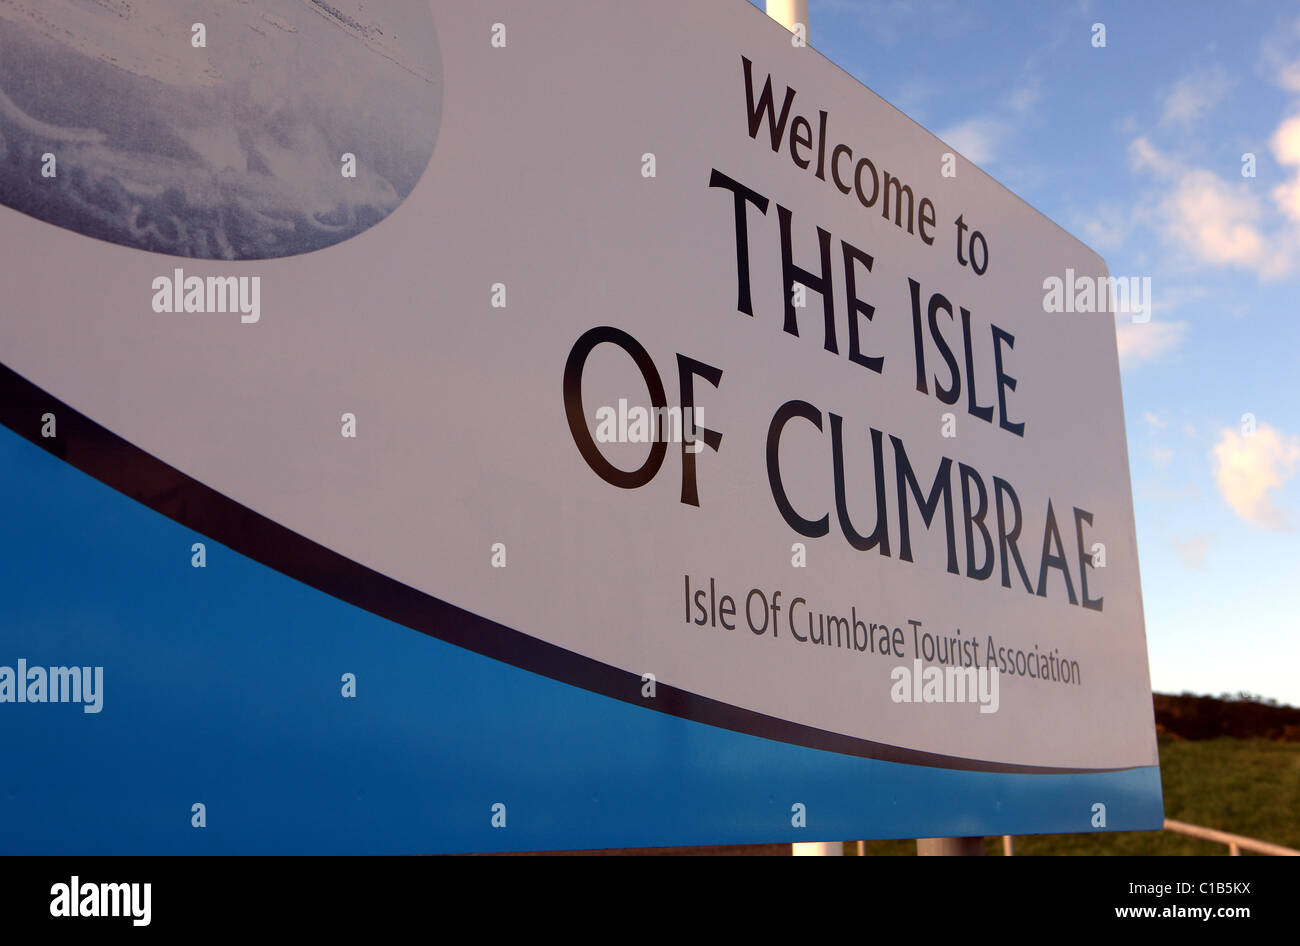 Welcome to the Isle of Cumbrae sign Stock Photo